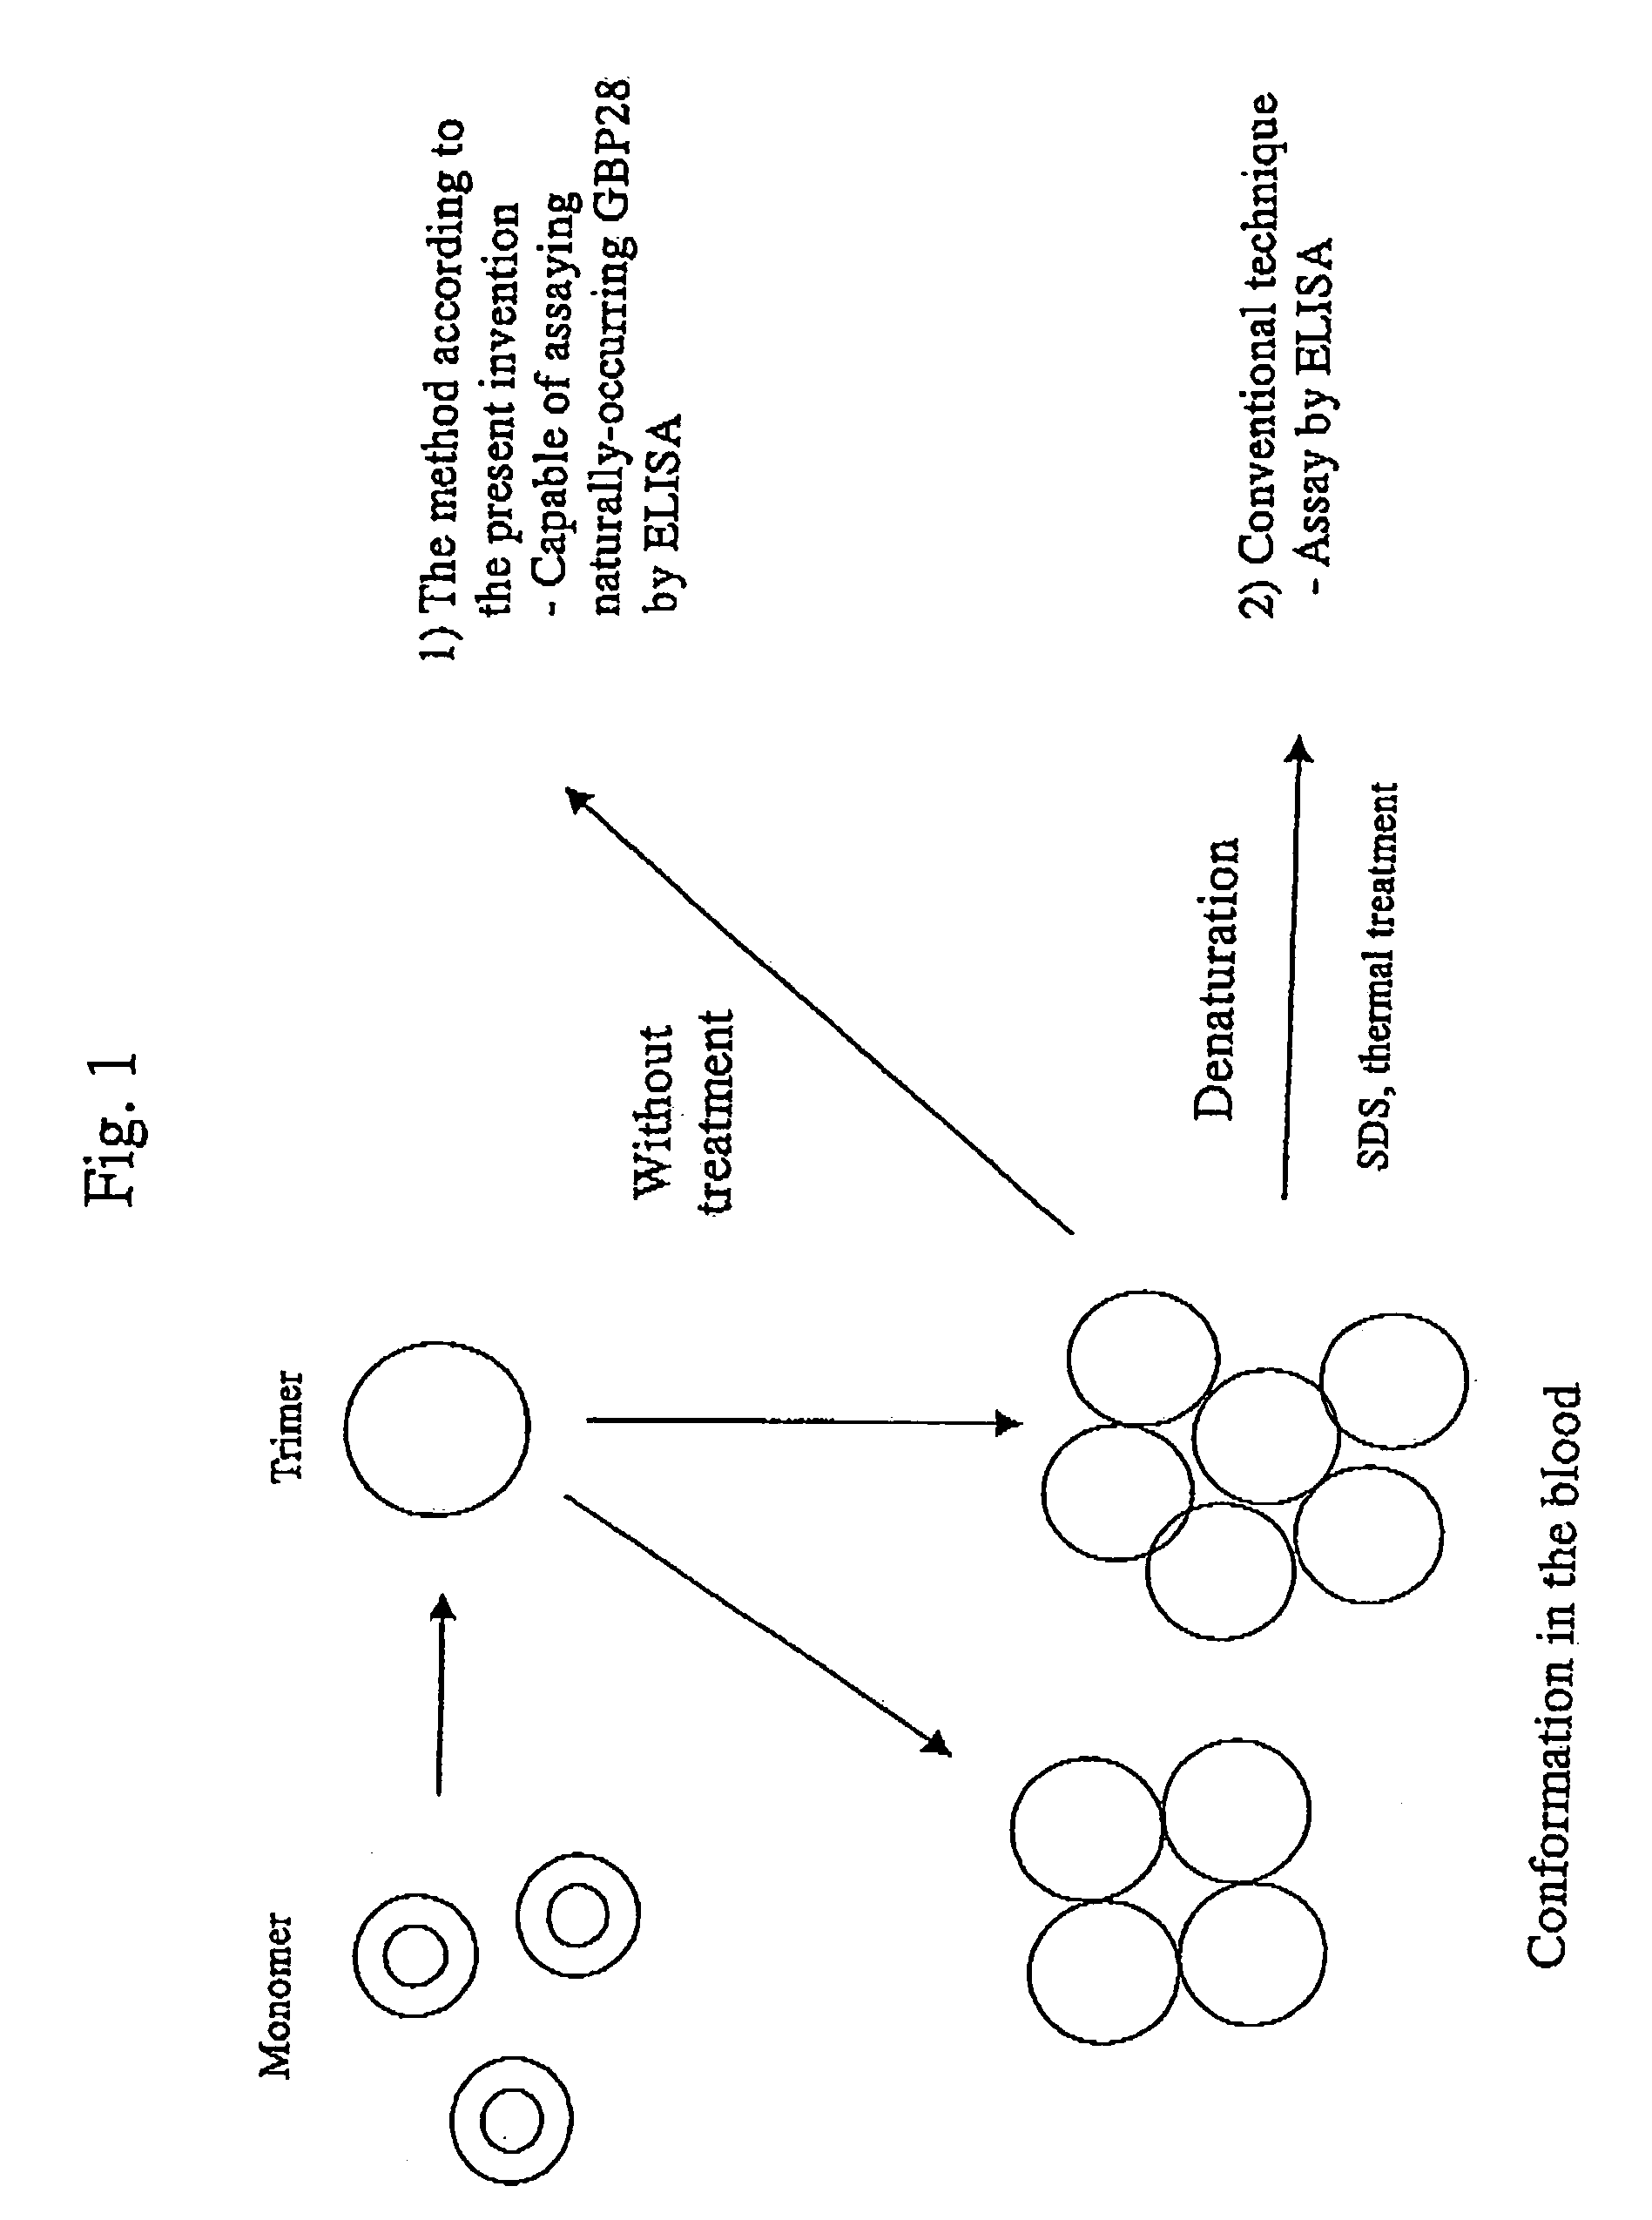 Method for diagnosing or monitoring carbohydrate metabolism disorders